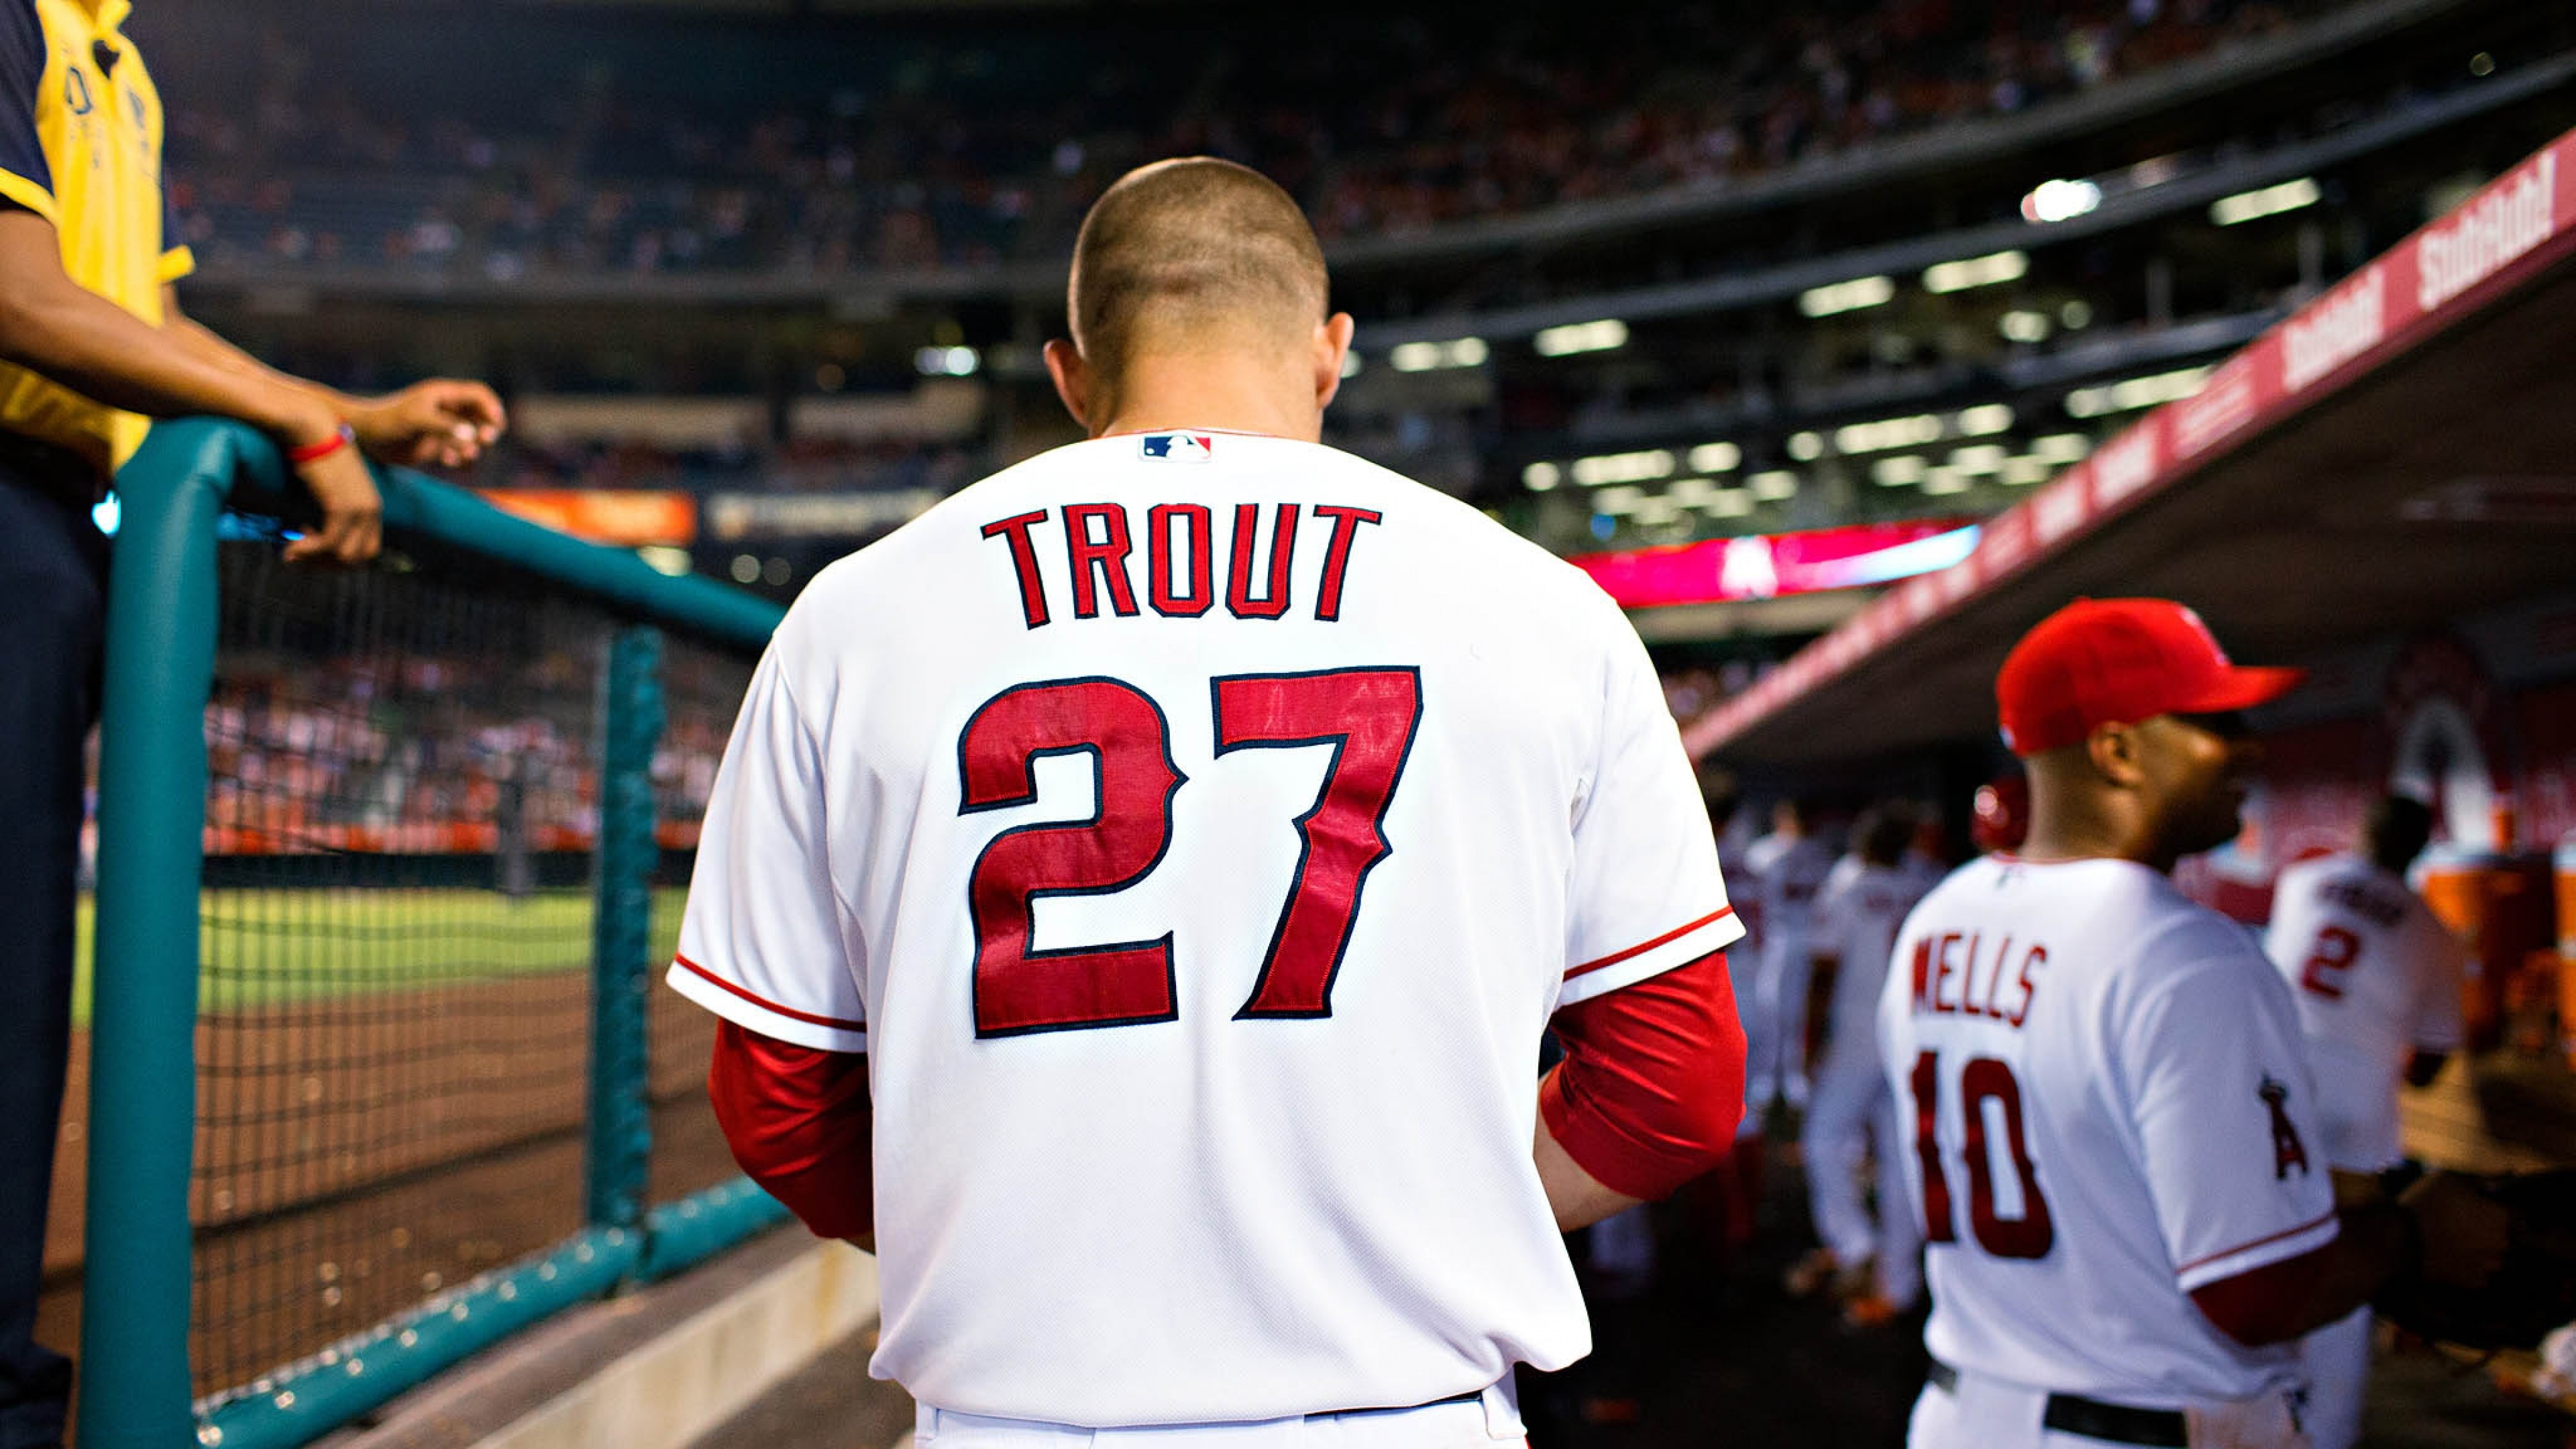 mike trout iPhone Wallpapers Free Download